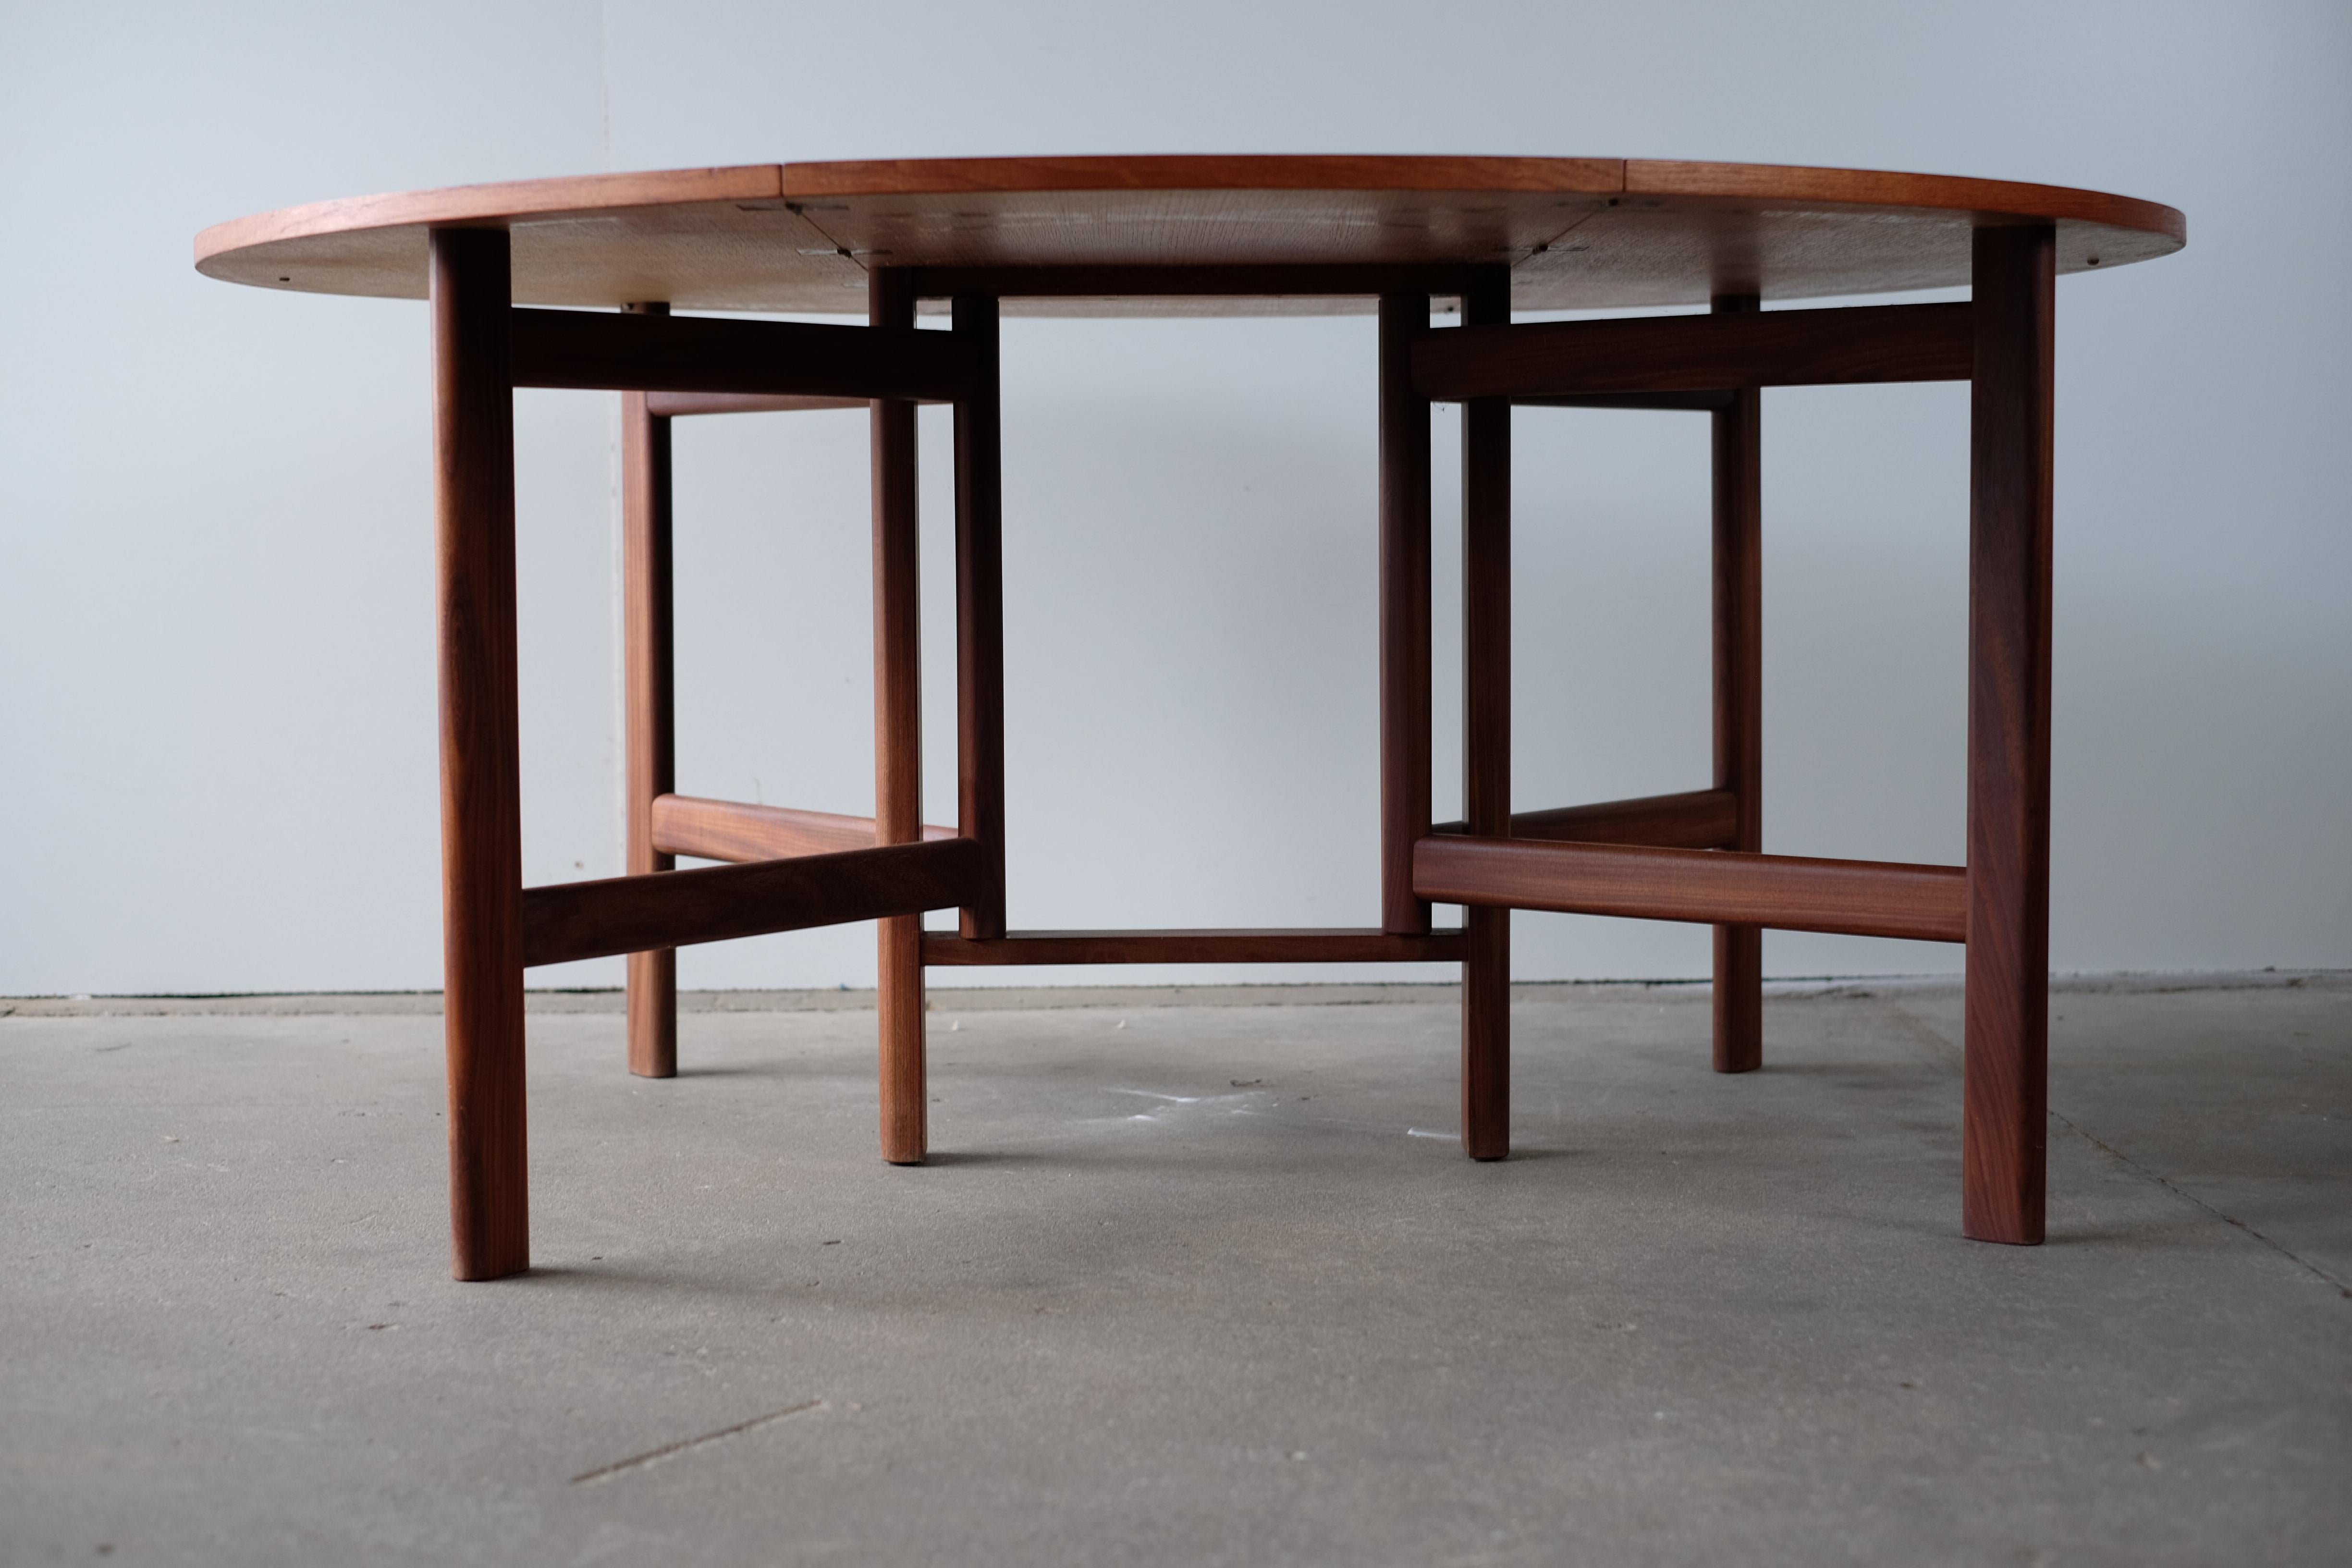 Stunning dining table in teak by unknown Danish designer. A table with many possibilities and with room for the whole family.
The table is very practical and in a great quality. It's a very special table I have not encountered before. The table is